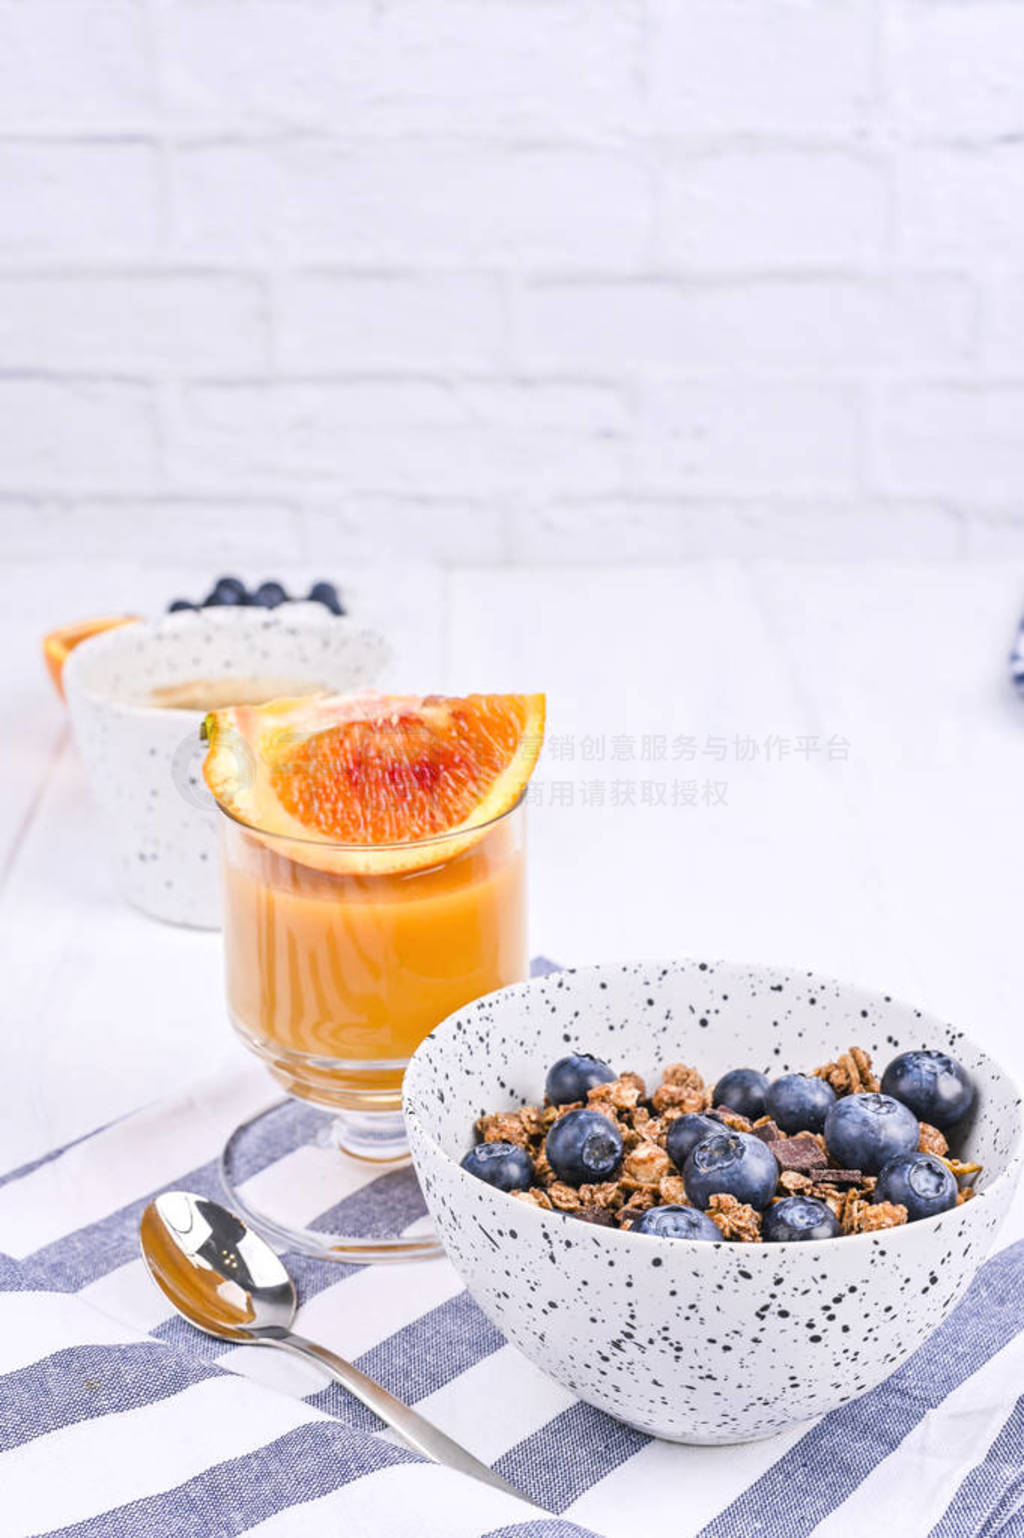 Breakfast on a white wooden background. Muesli with berries and